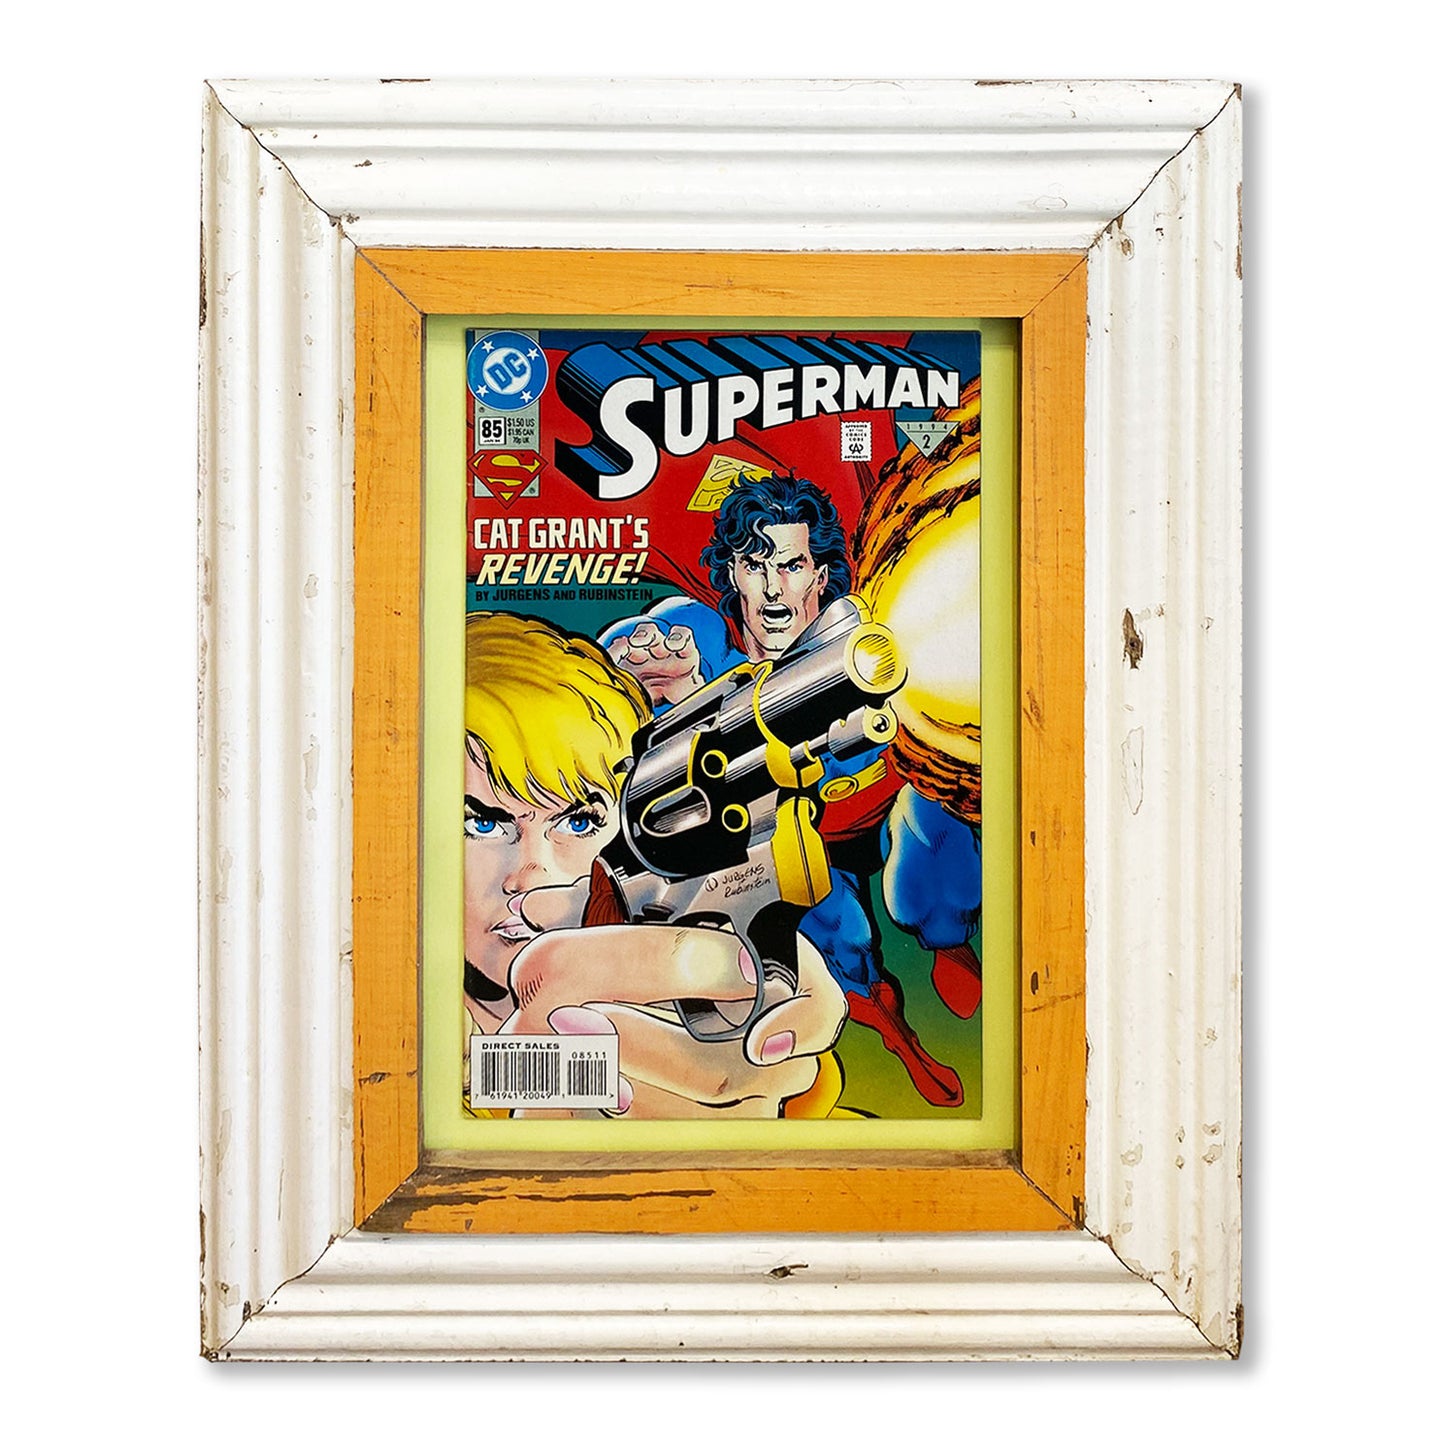 Comics Superman framed. Unique gift to surprise your loved ones.